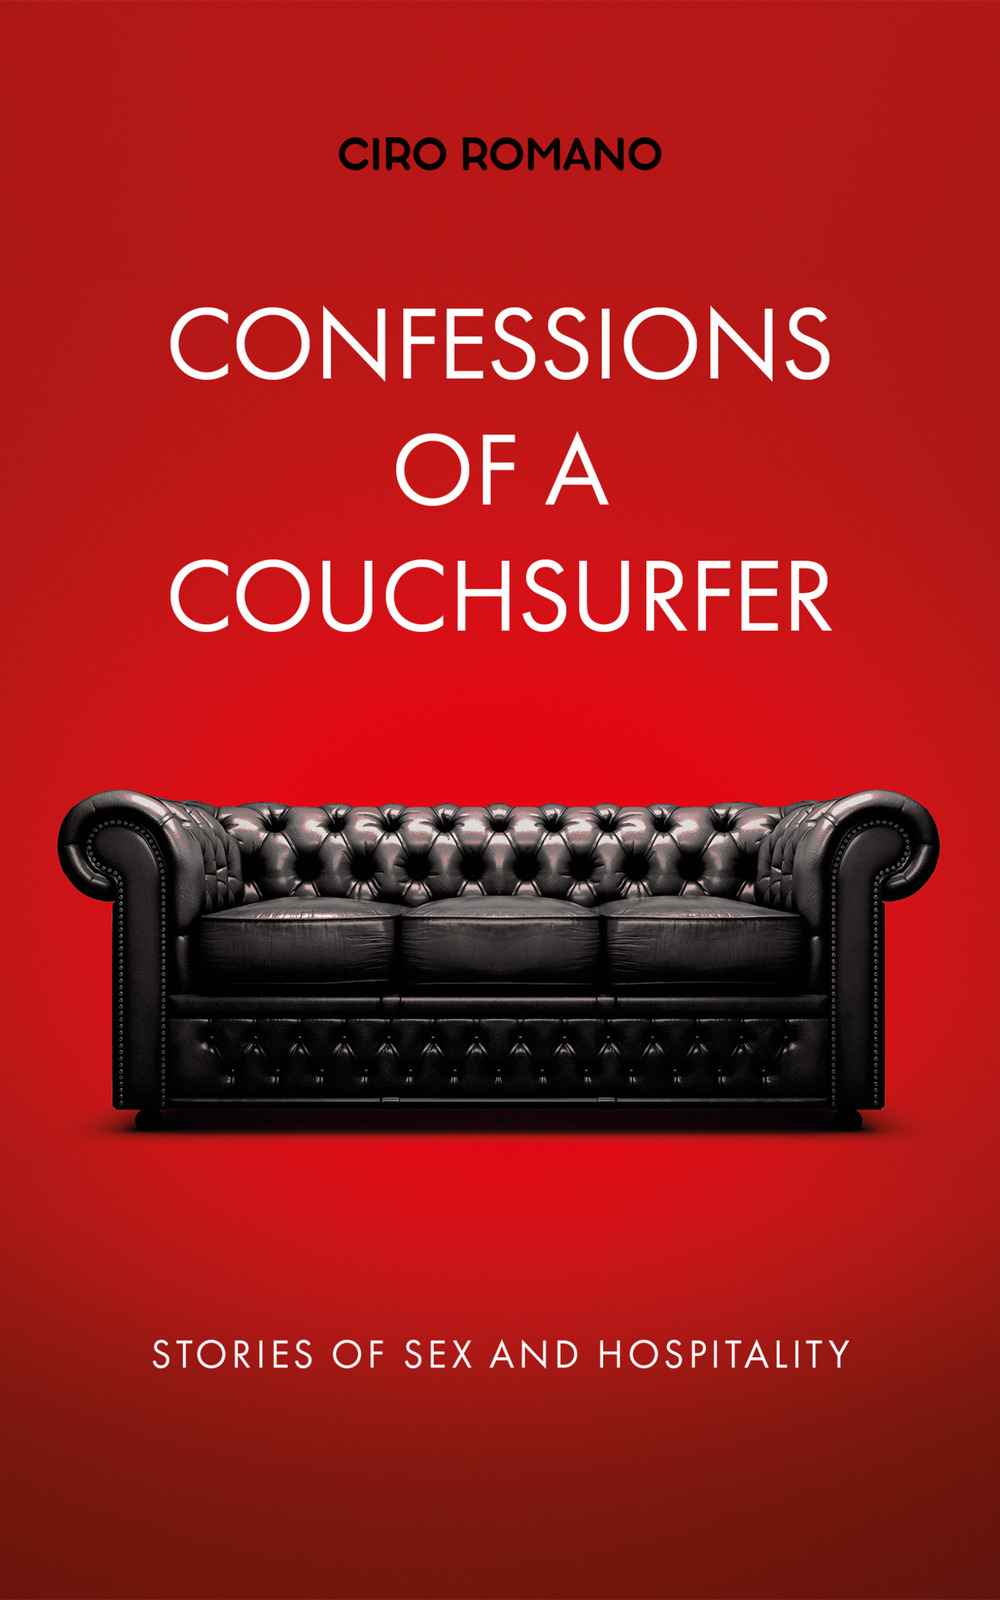 Confessions of a couchsurfer. Stories of sex and hospitality